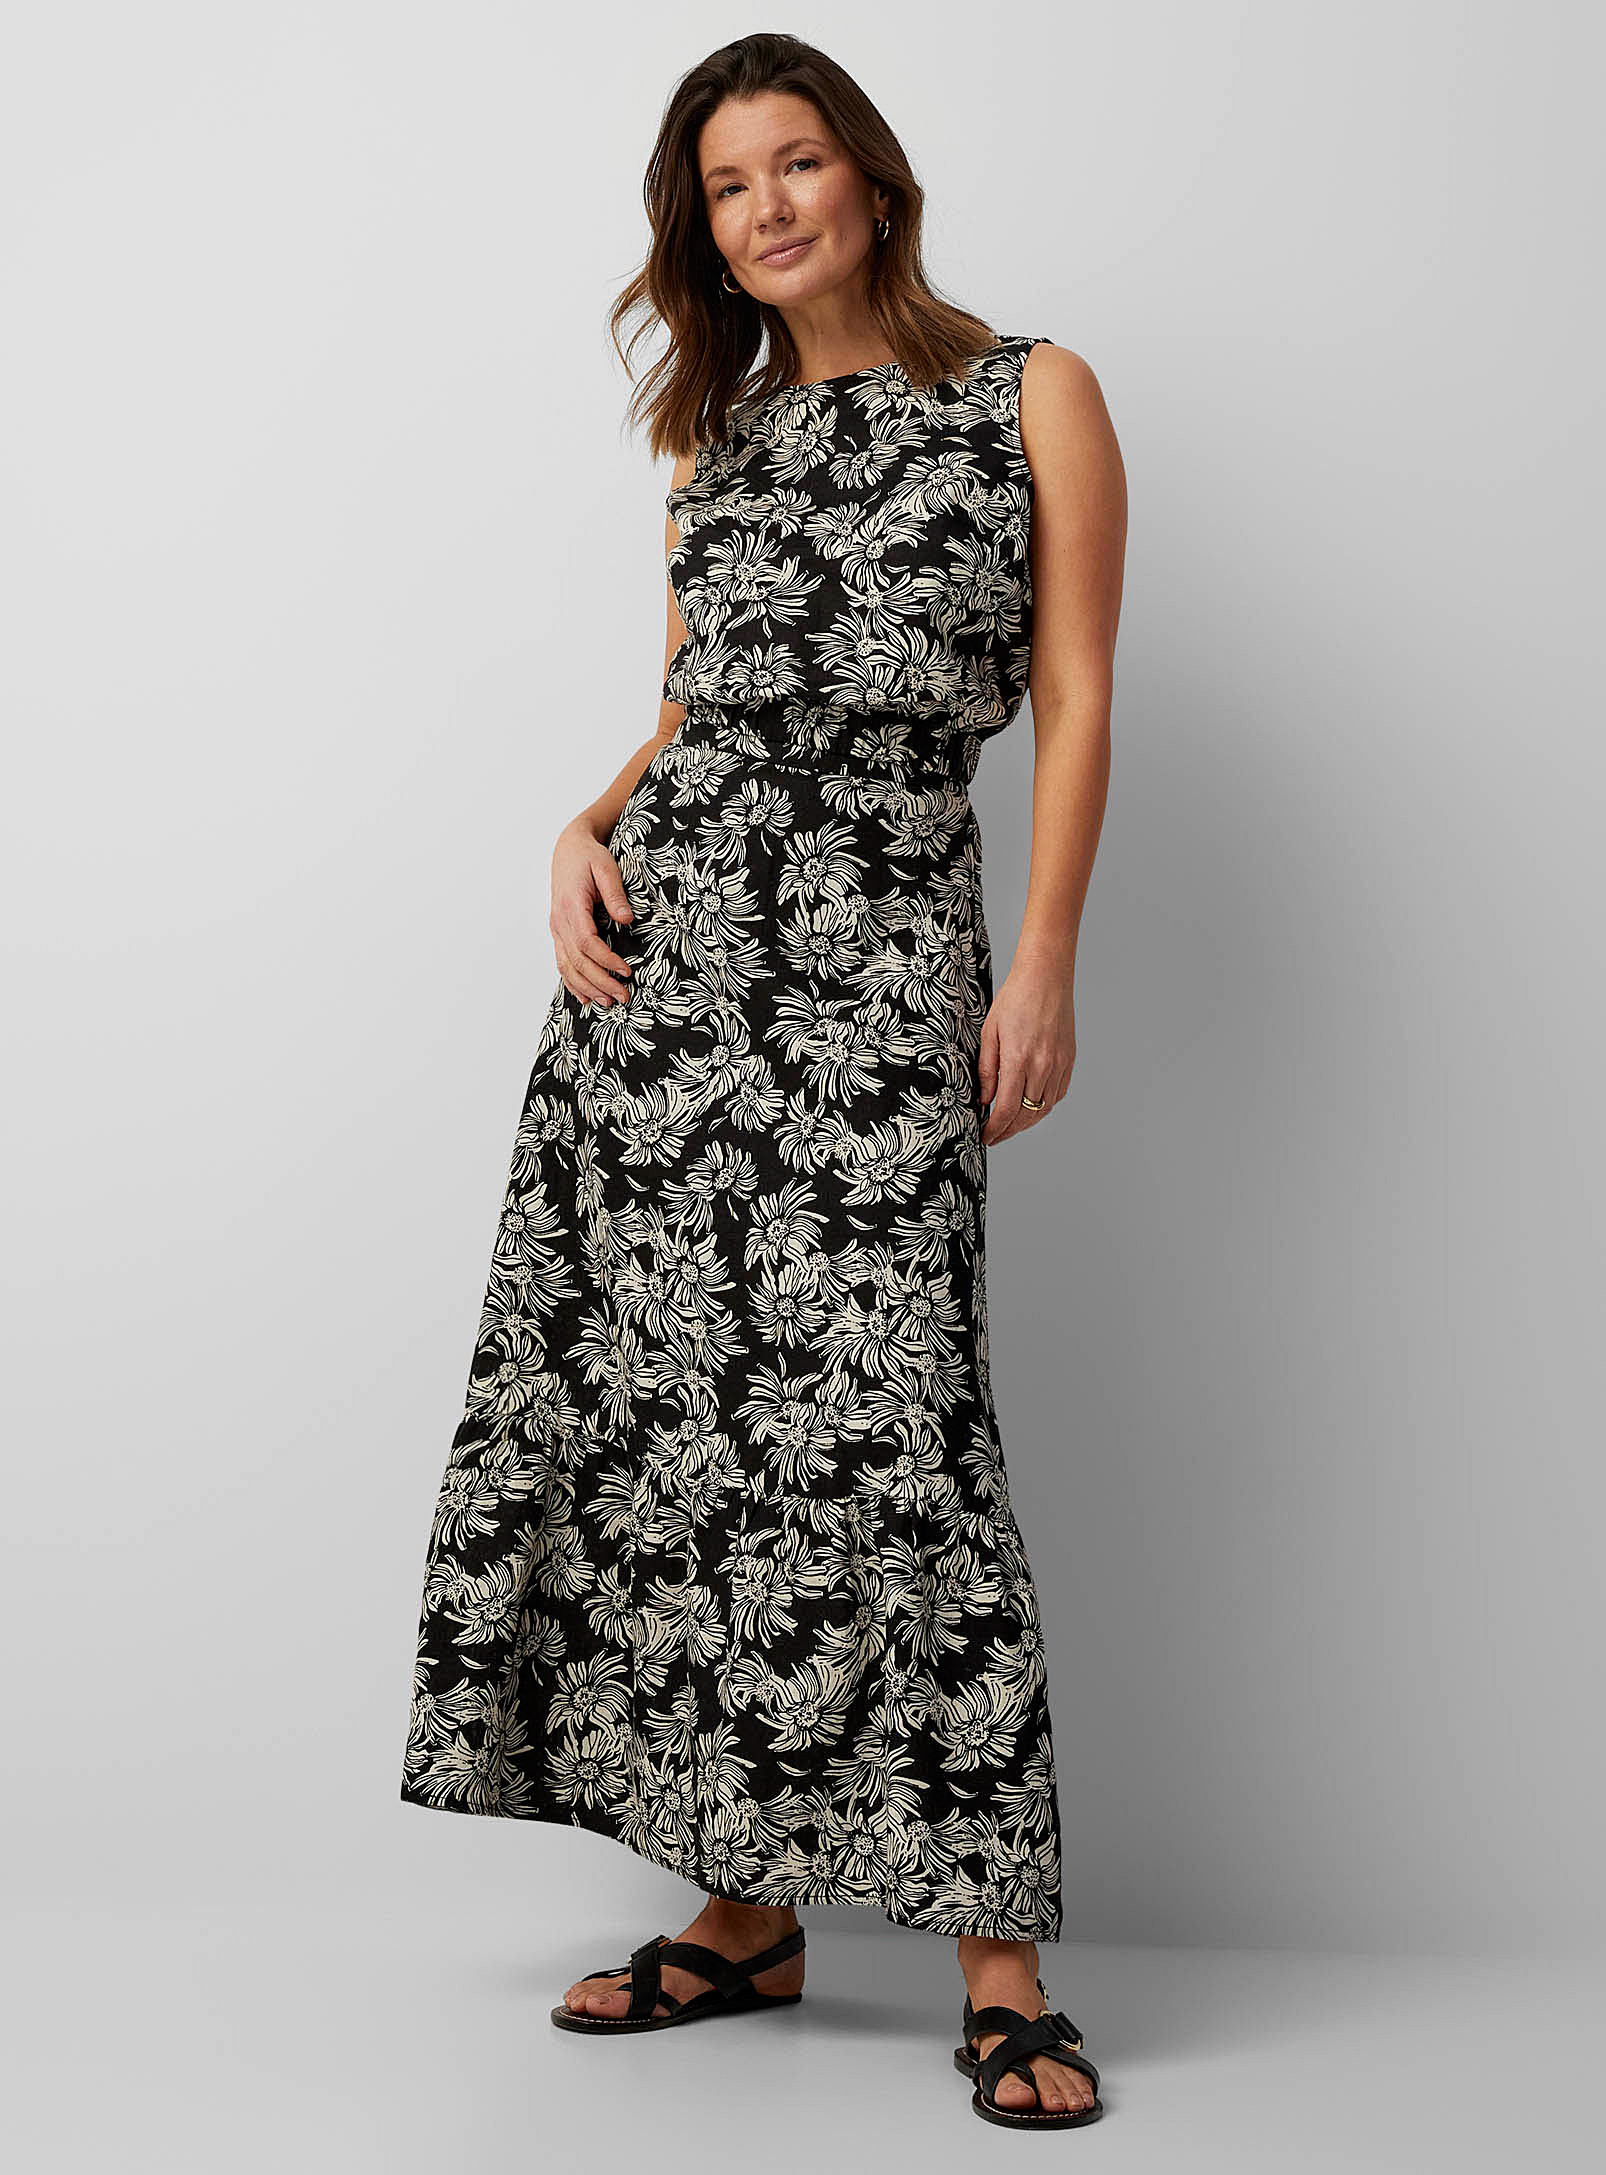 Contemporaine Pure Linen Ruffled Maxi Skirt In Patterned Black